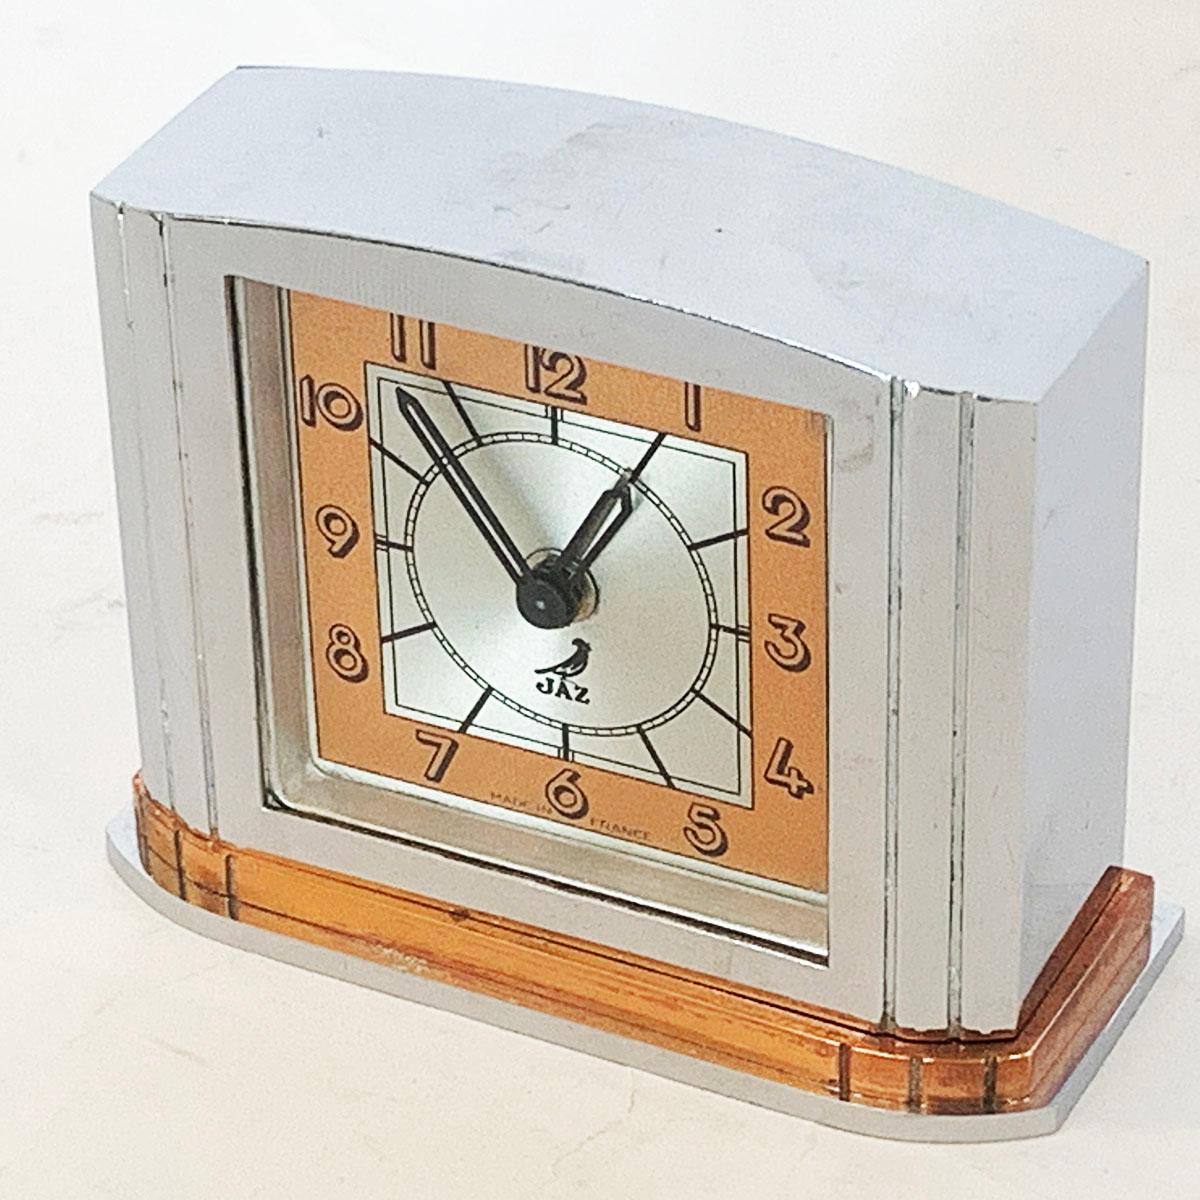 Mid-20th Century Art Deco French Bedside or Desk Clock by JAZ